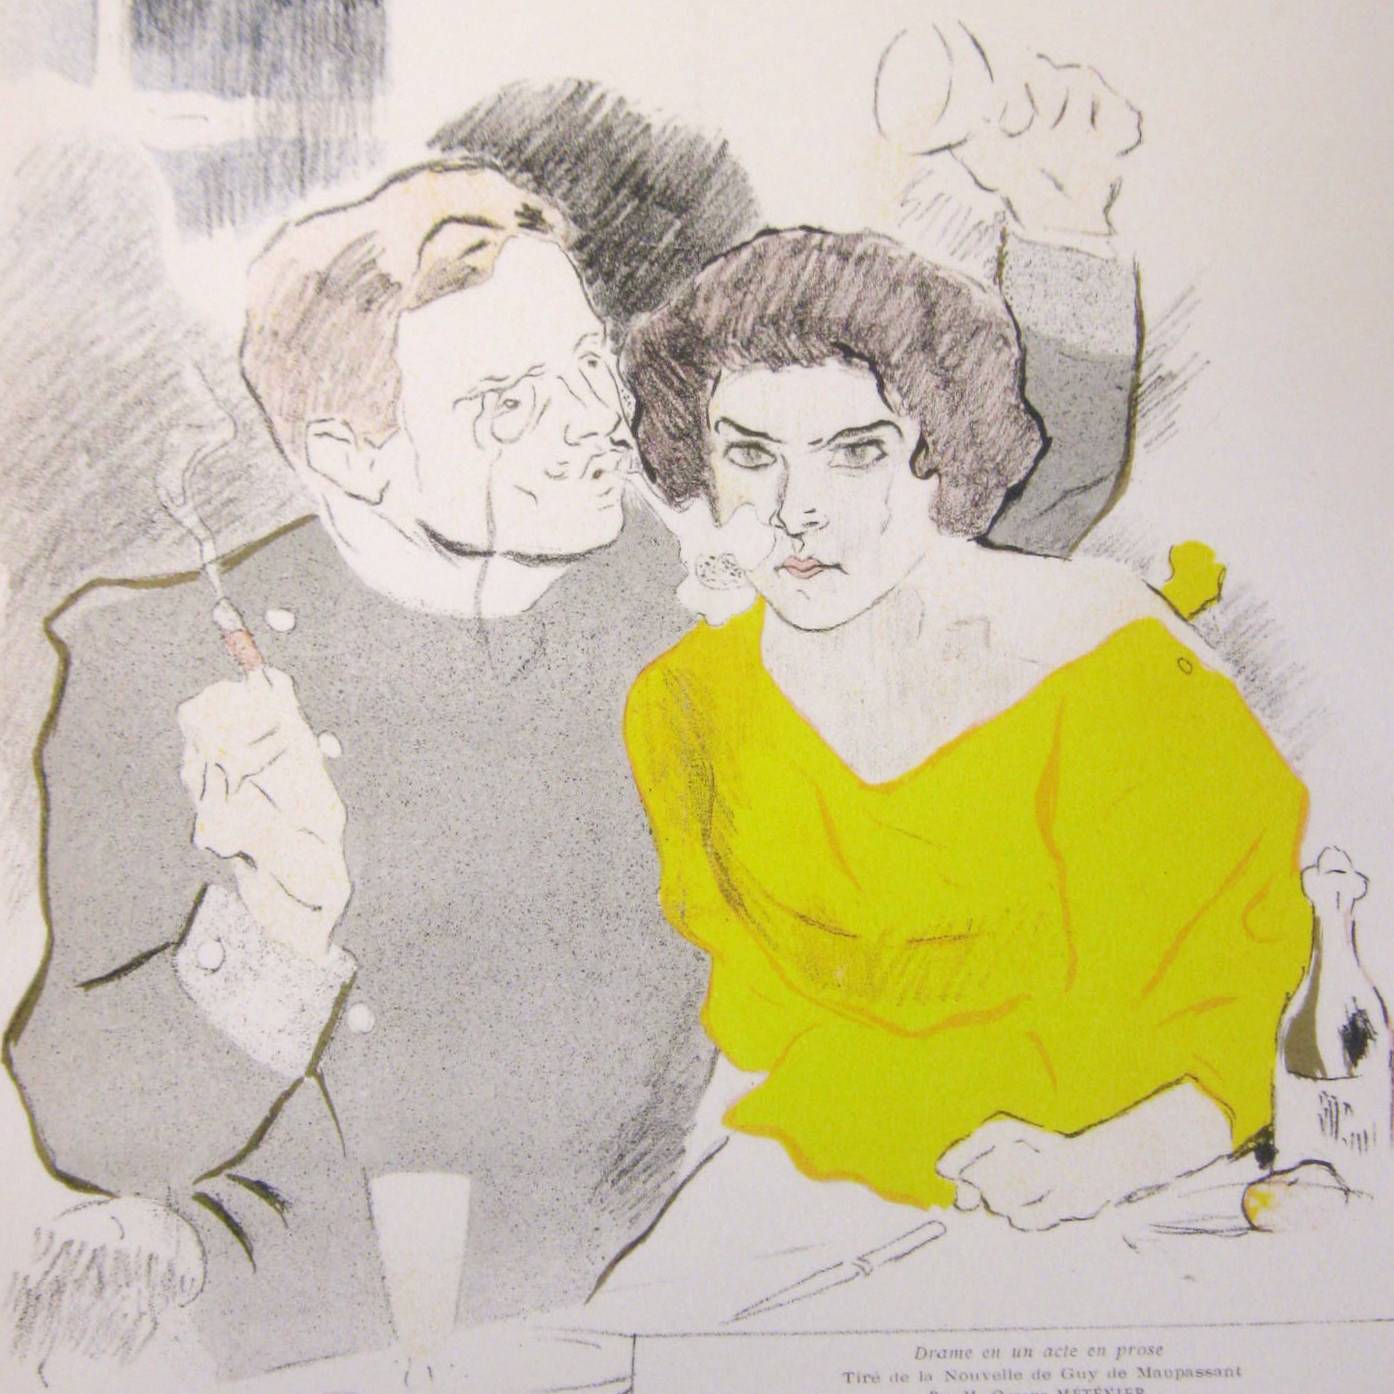 Color lithographic of man speaking to and blowing smoke at woman in yellow dress. She looks angry and is clenching her fist.